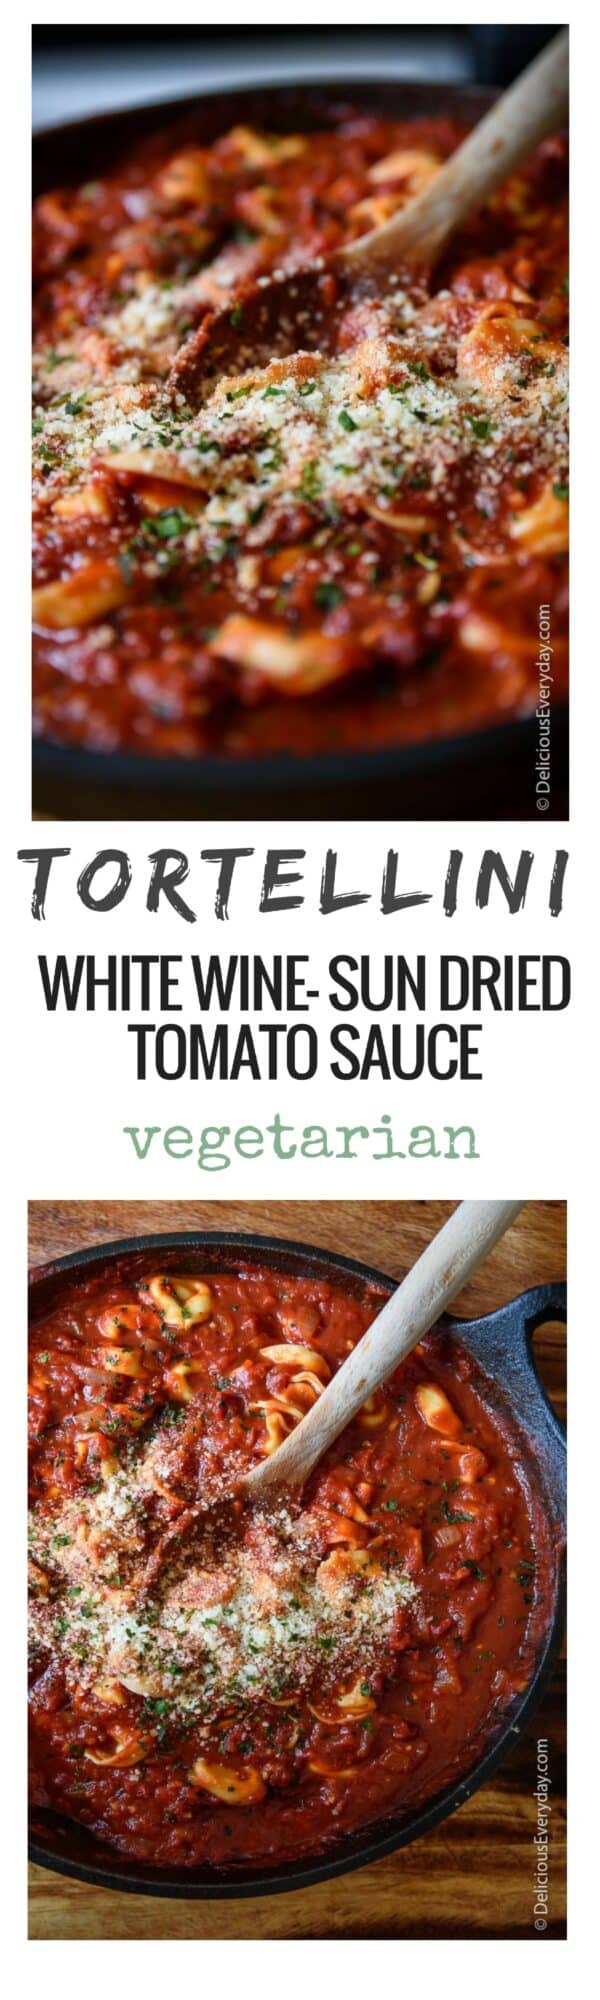 tortellini with white wine and sun dried tomato sauce